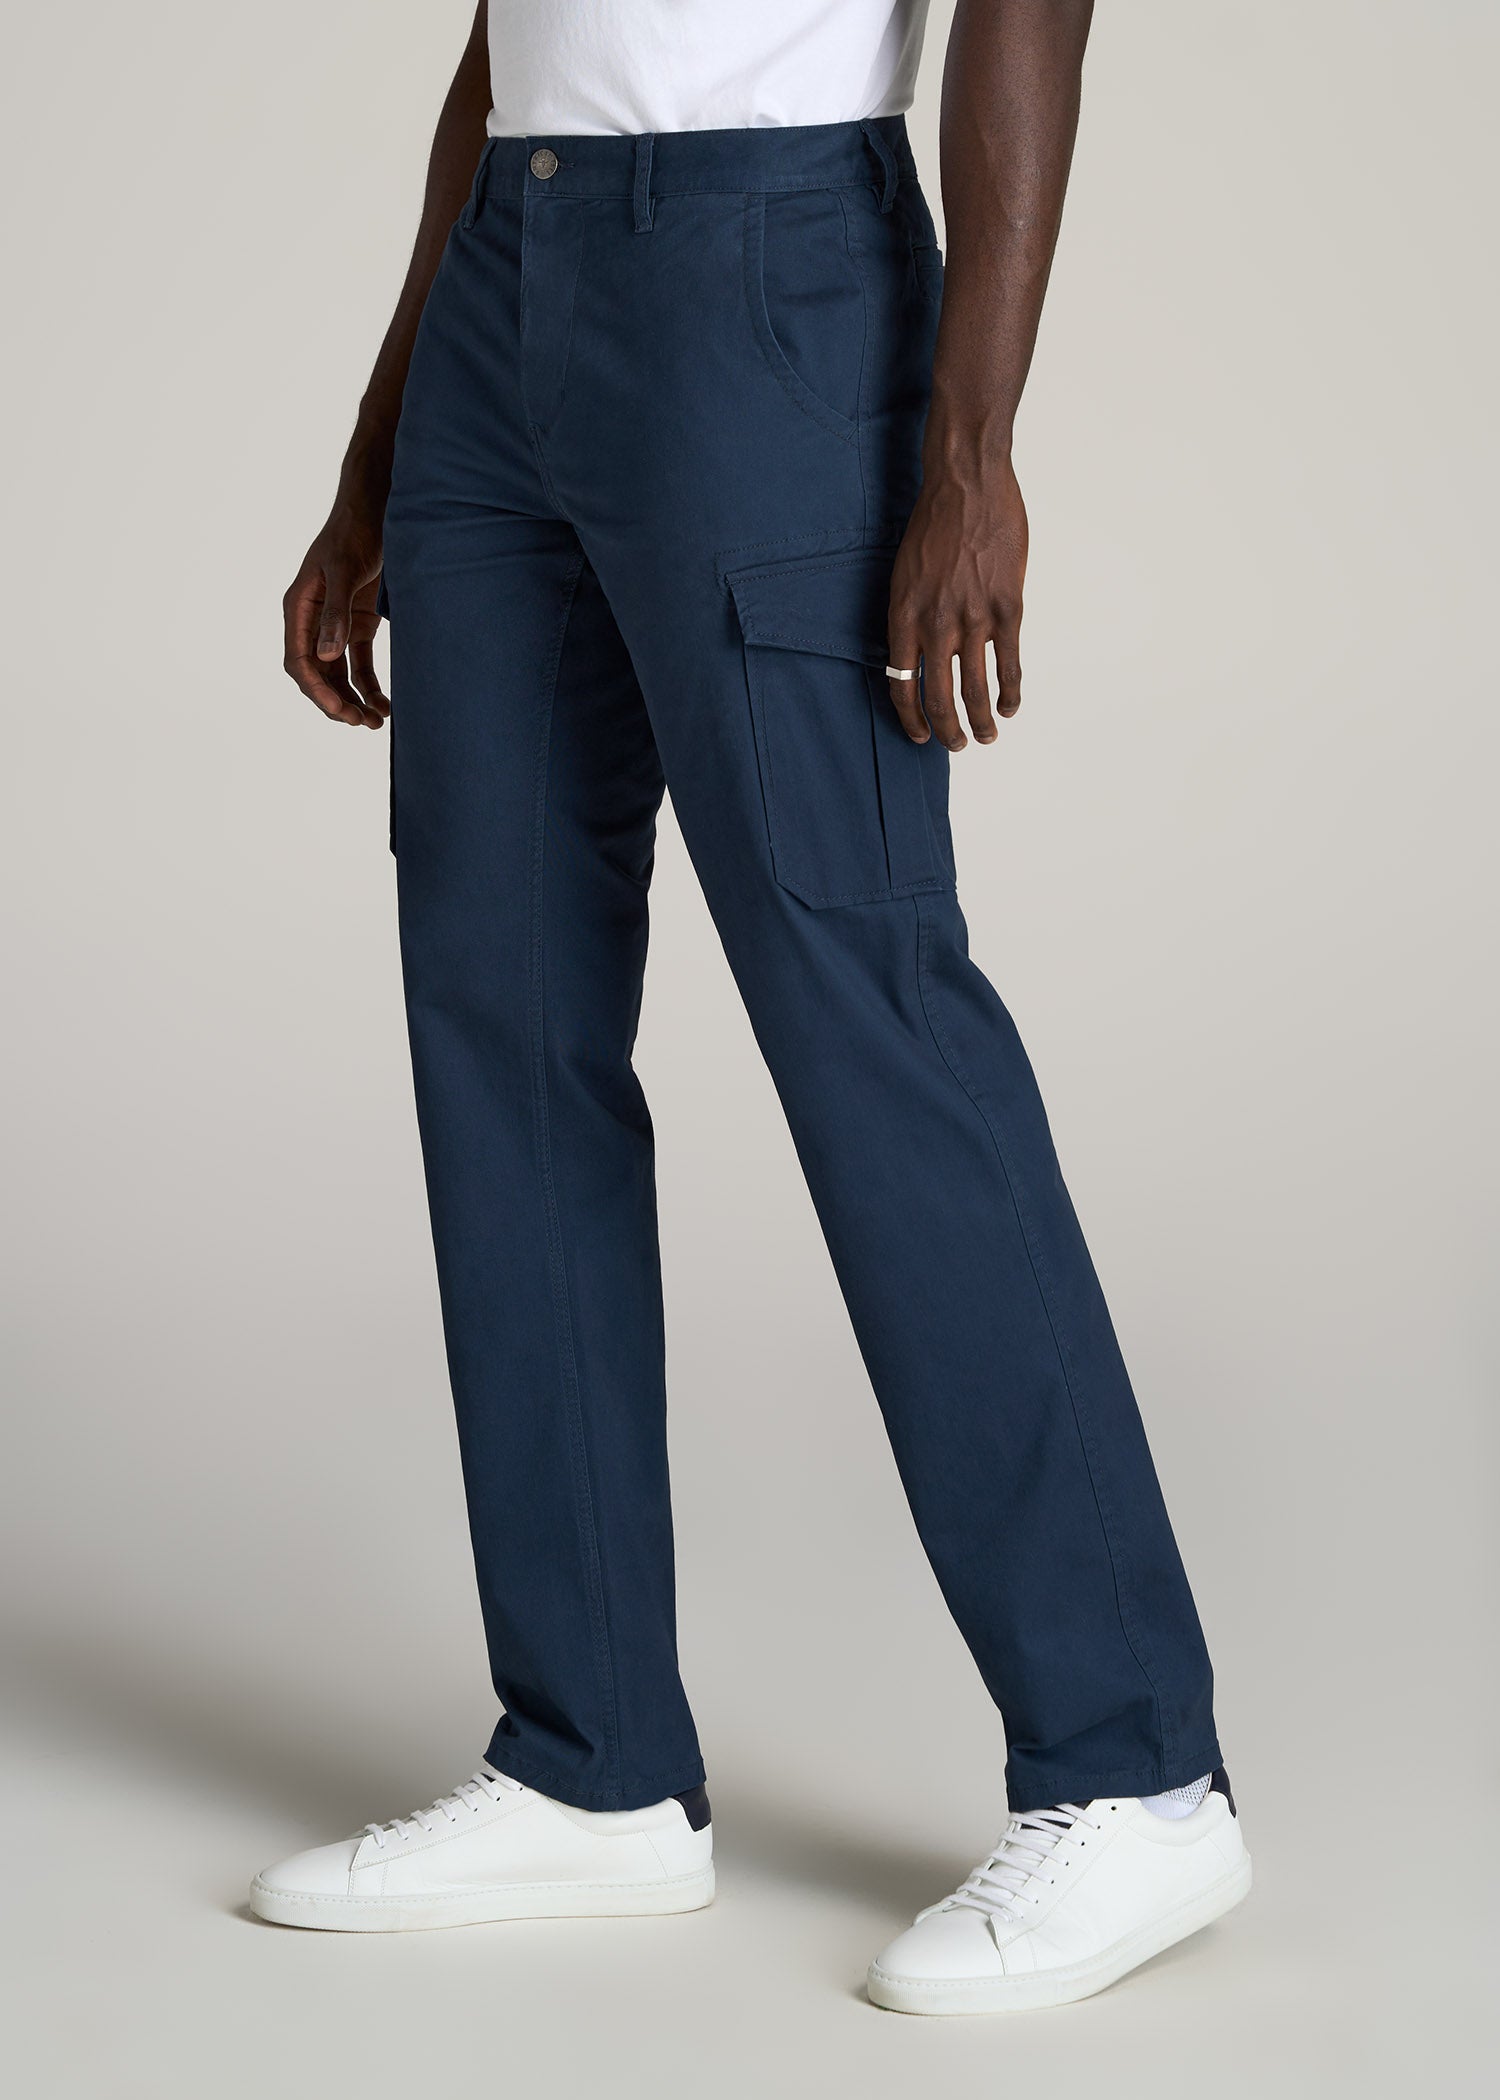 Stretch Twill SLIM-FIT Cargo Pants for Tall Men in Marine Navy